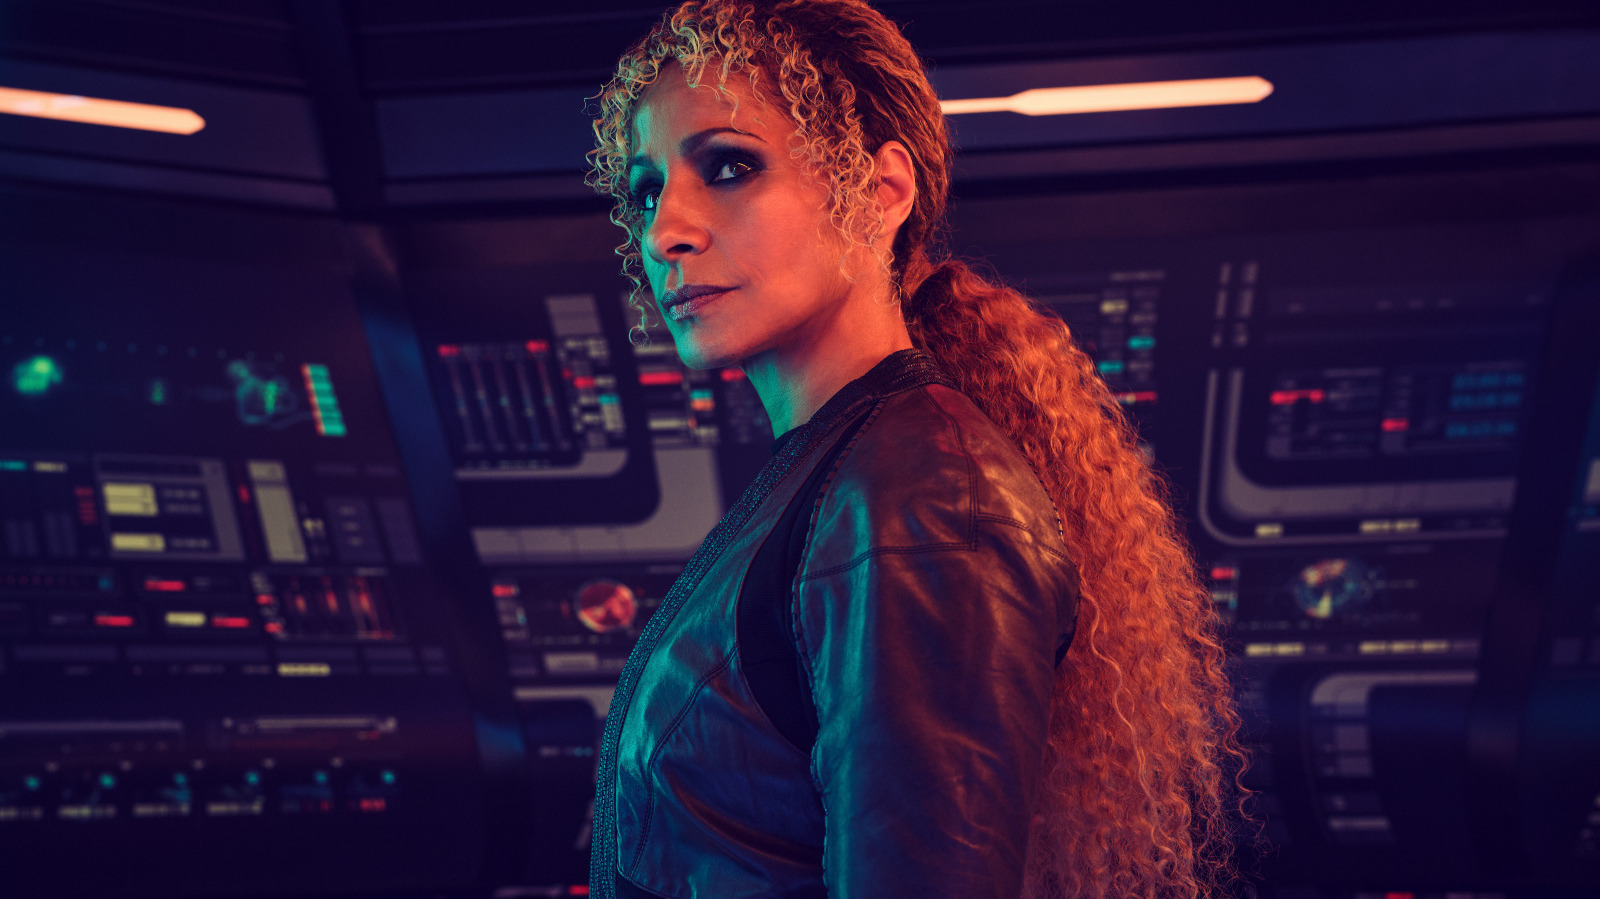 Star Trek’s Michelle Hurd Has A Black Belt And Wasn’t Afraid To Use It In Picard